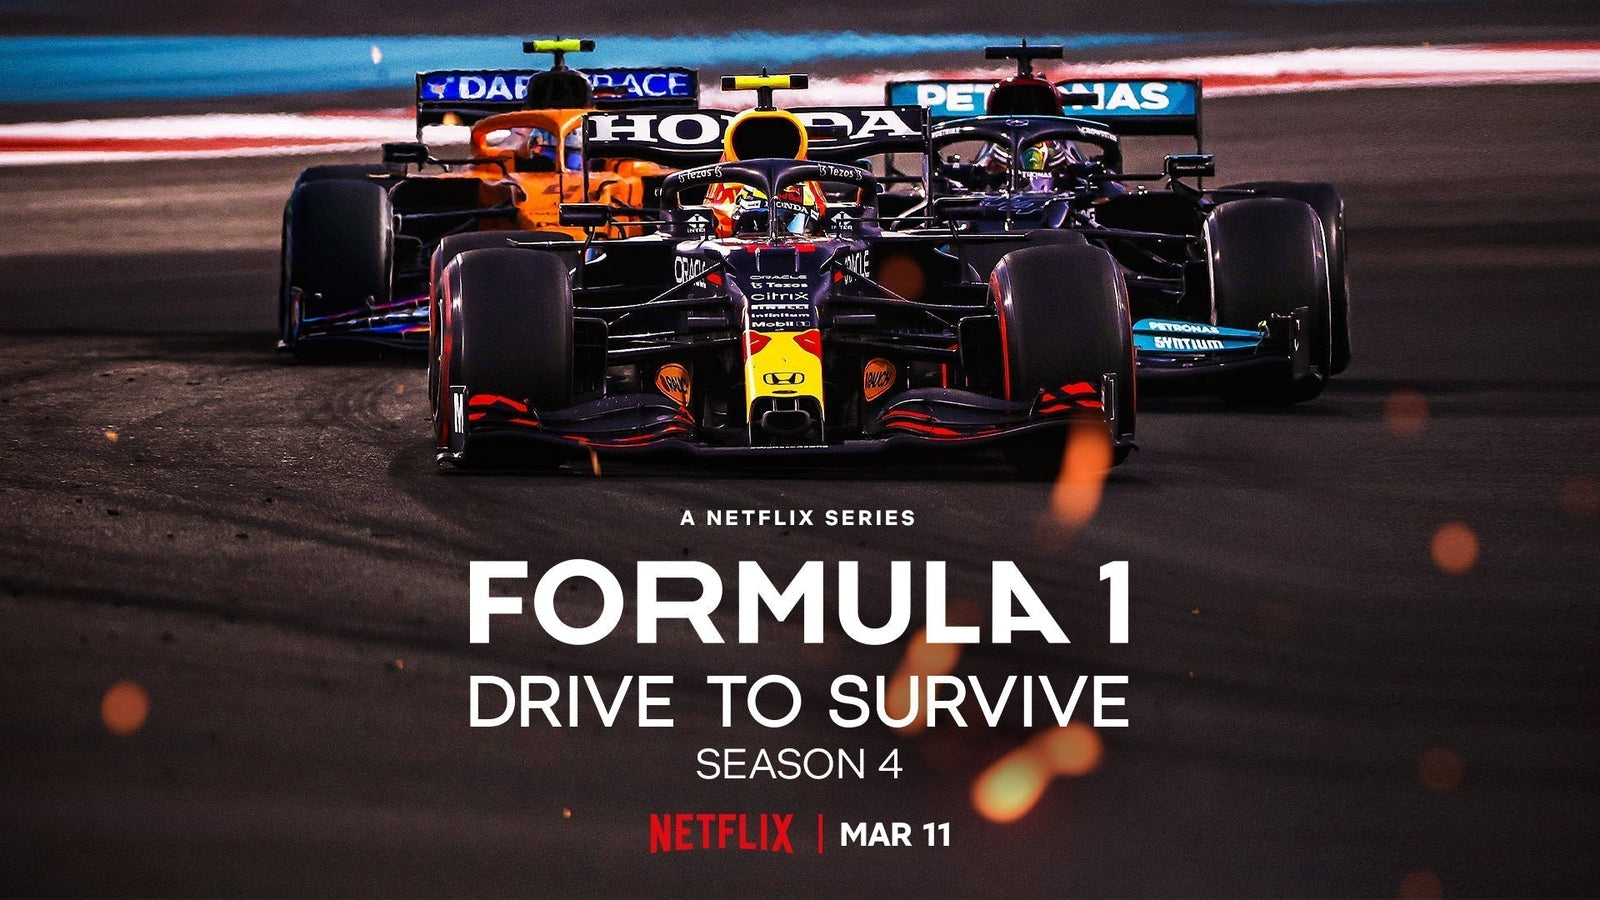 Why you should watch Netflix Drive to Survive season 4 and what to expect - Fueler store